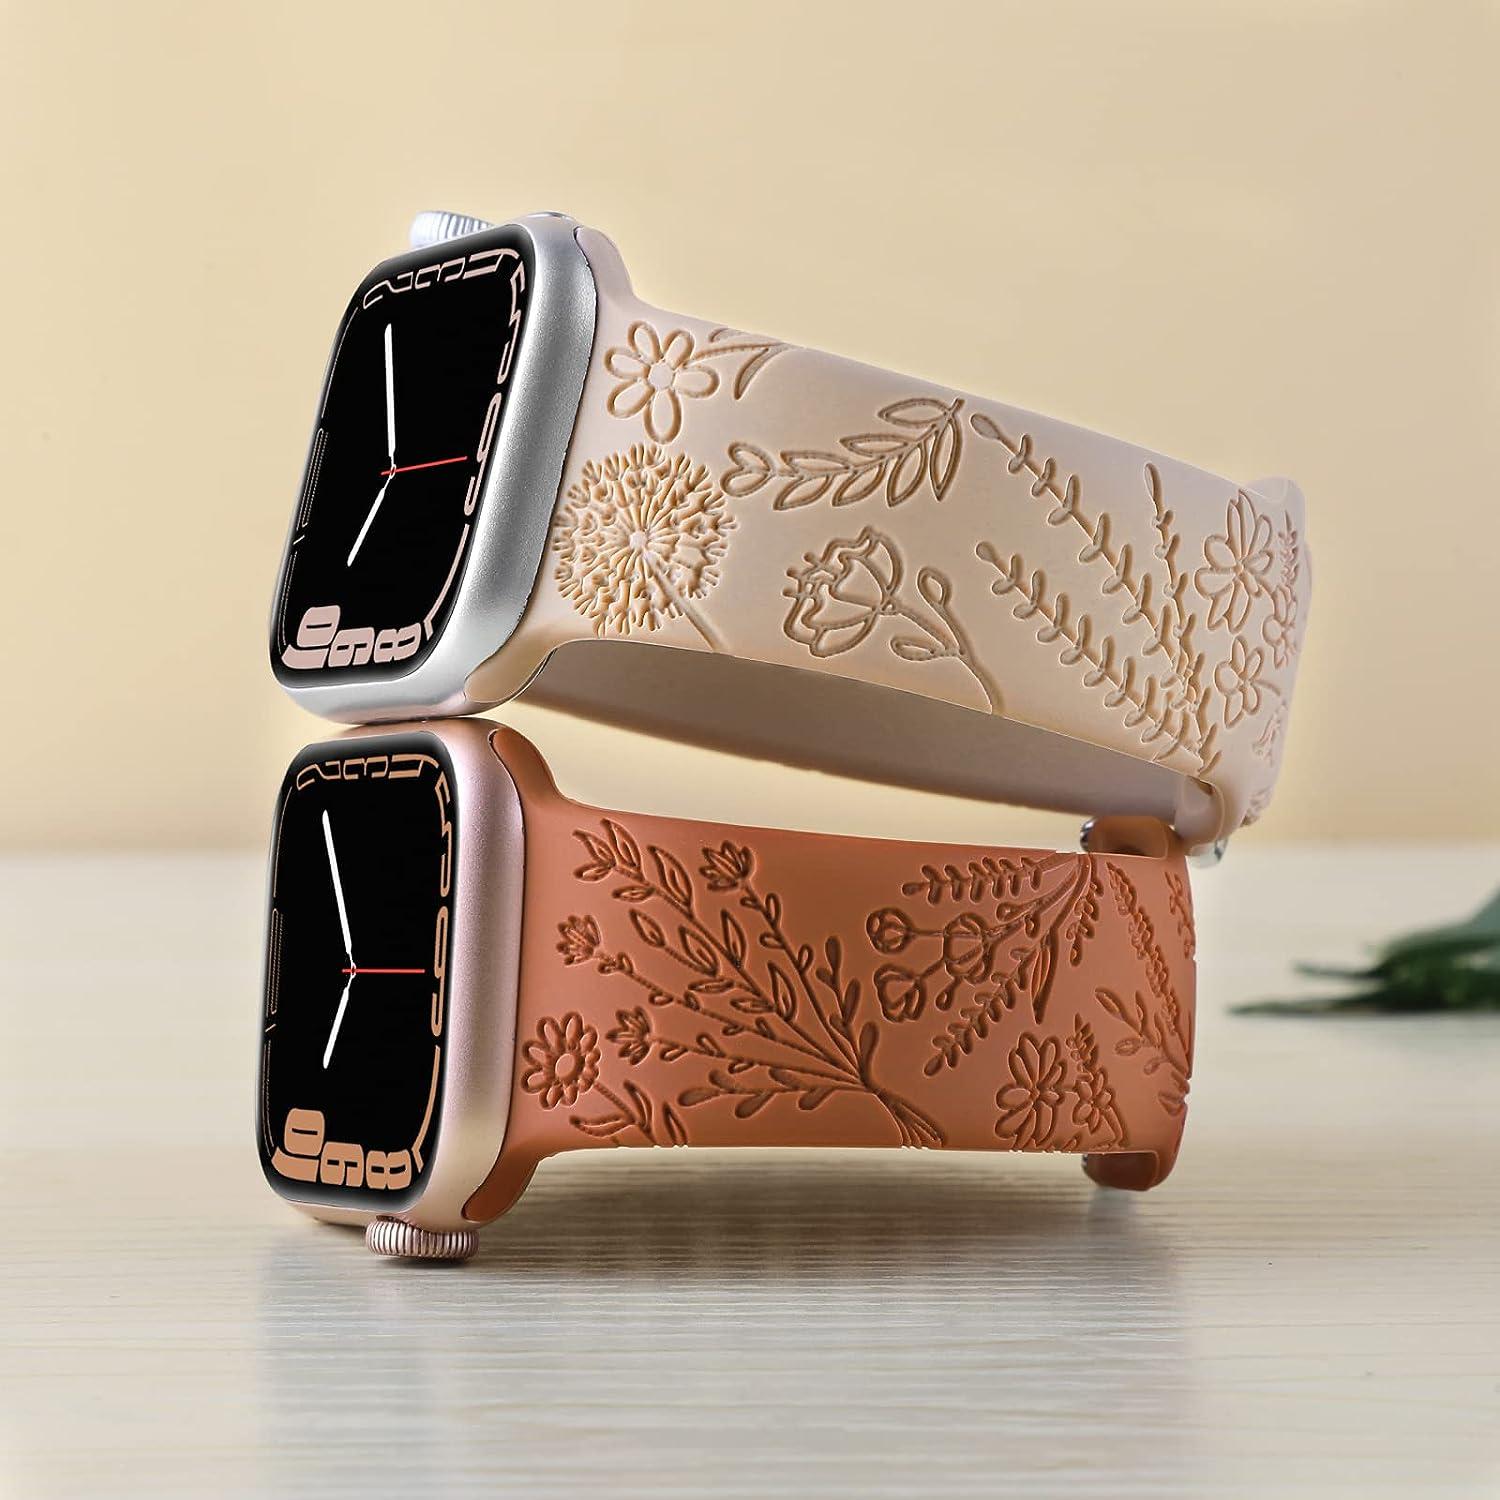 Flower Engraved Silicone Band Compatible with Apple Watch Bands 38mm 40mm  41mm, Cute Women Wildflowers Floral Design Soft Sport Strap Replacement